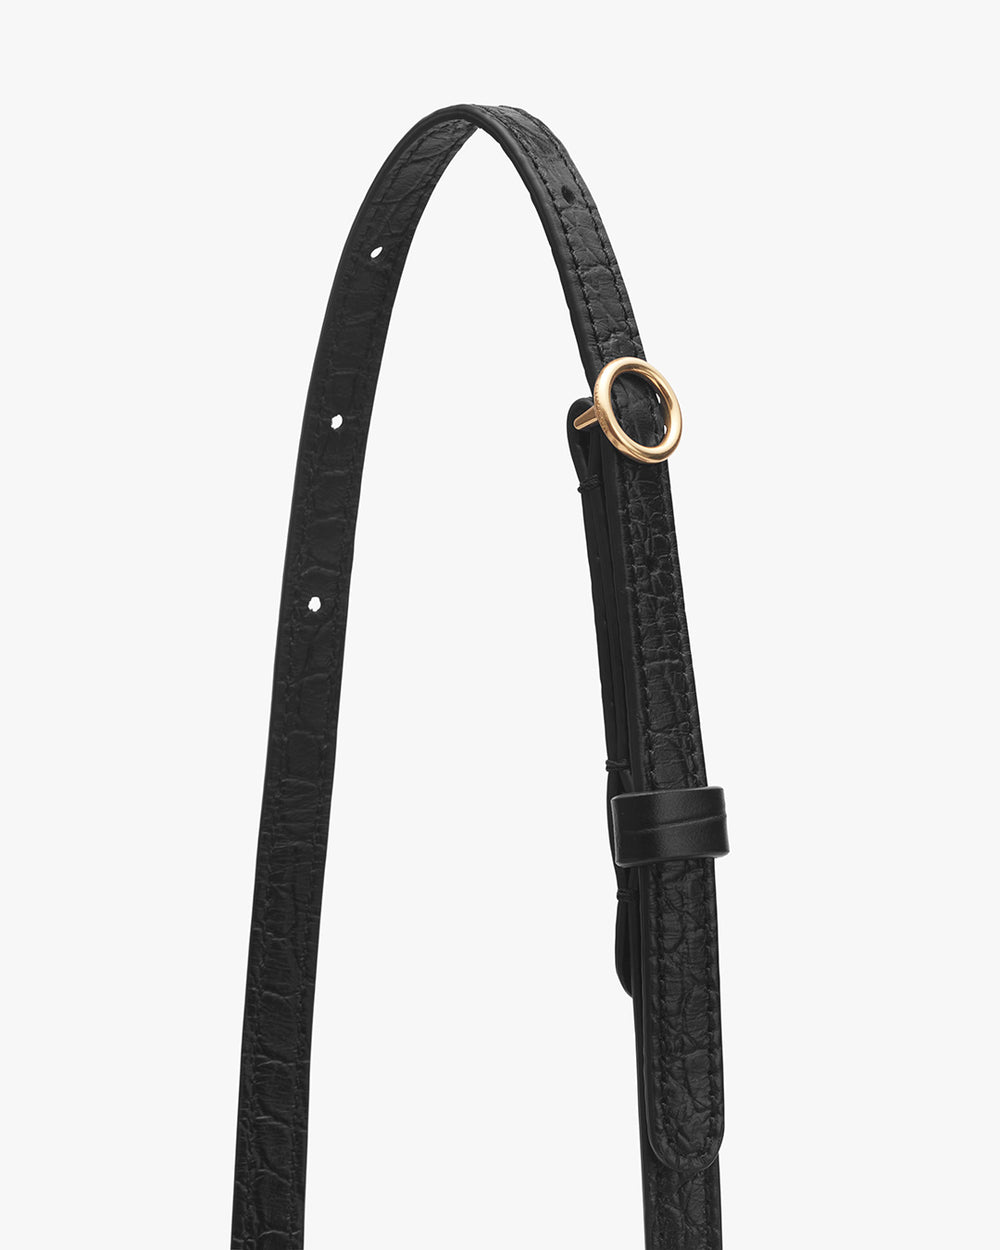 Leather belt with a circular buckle and loop.